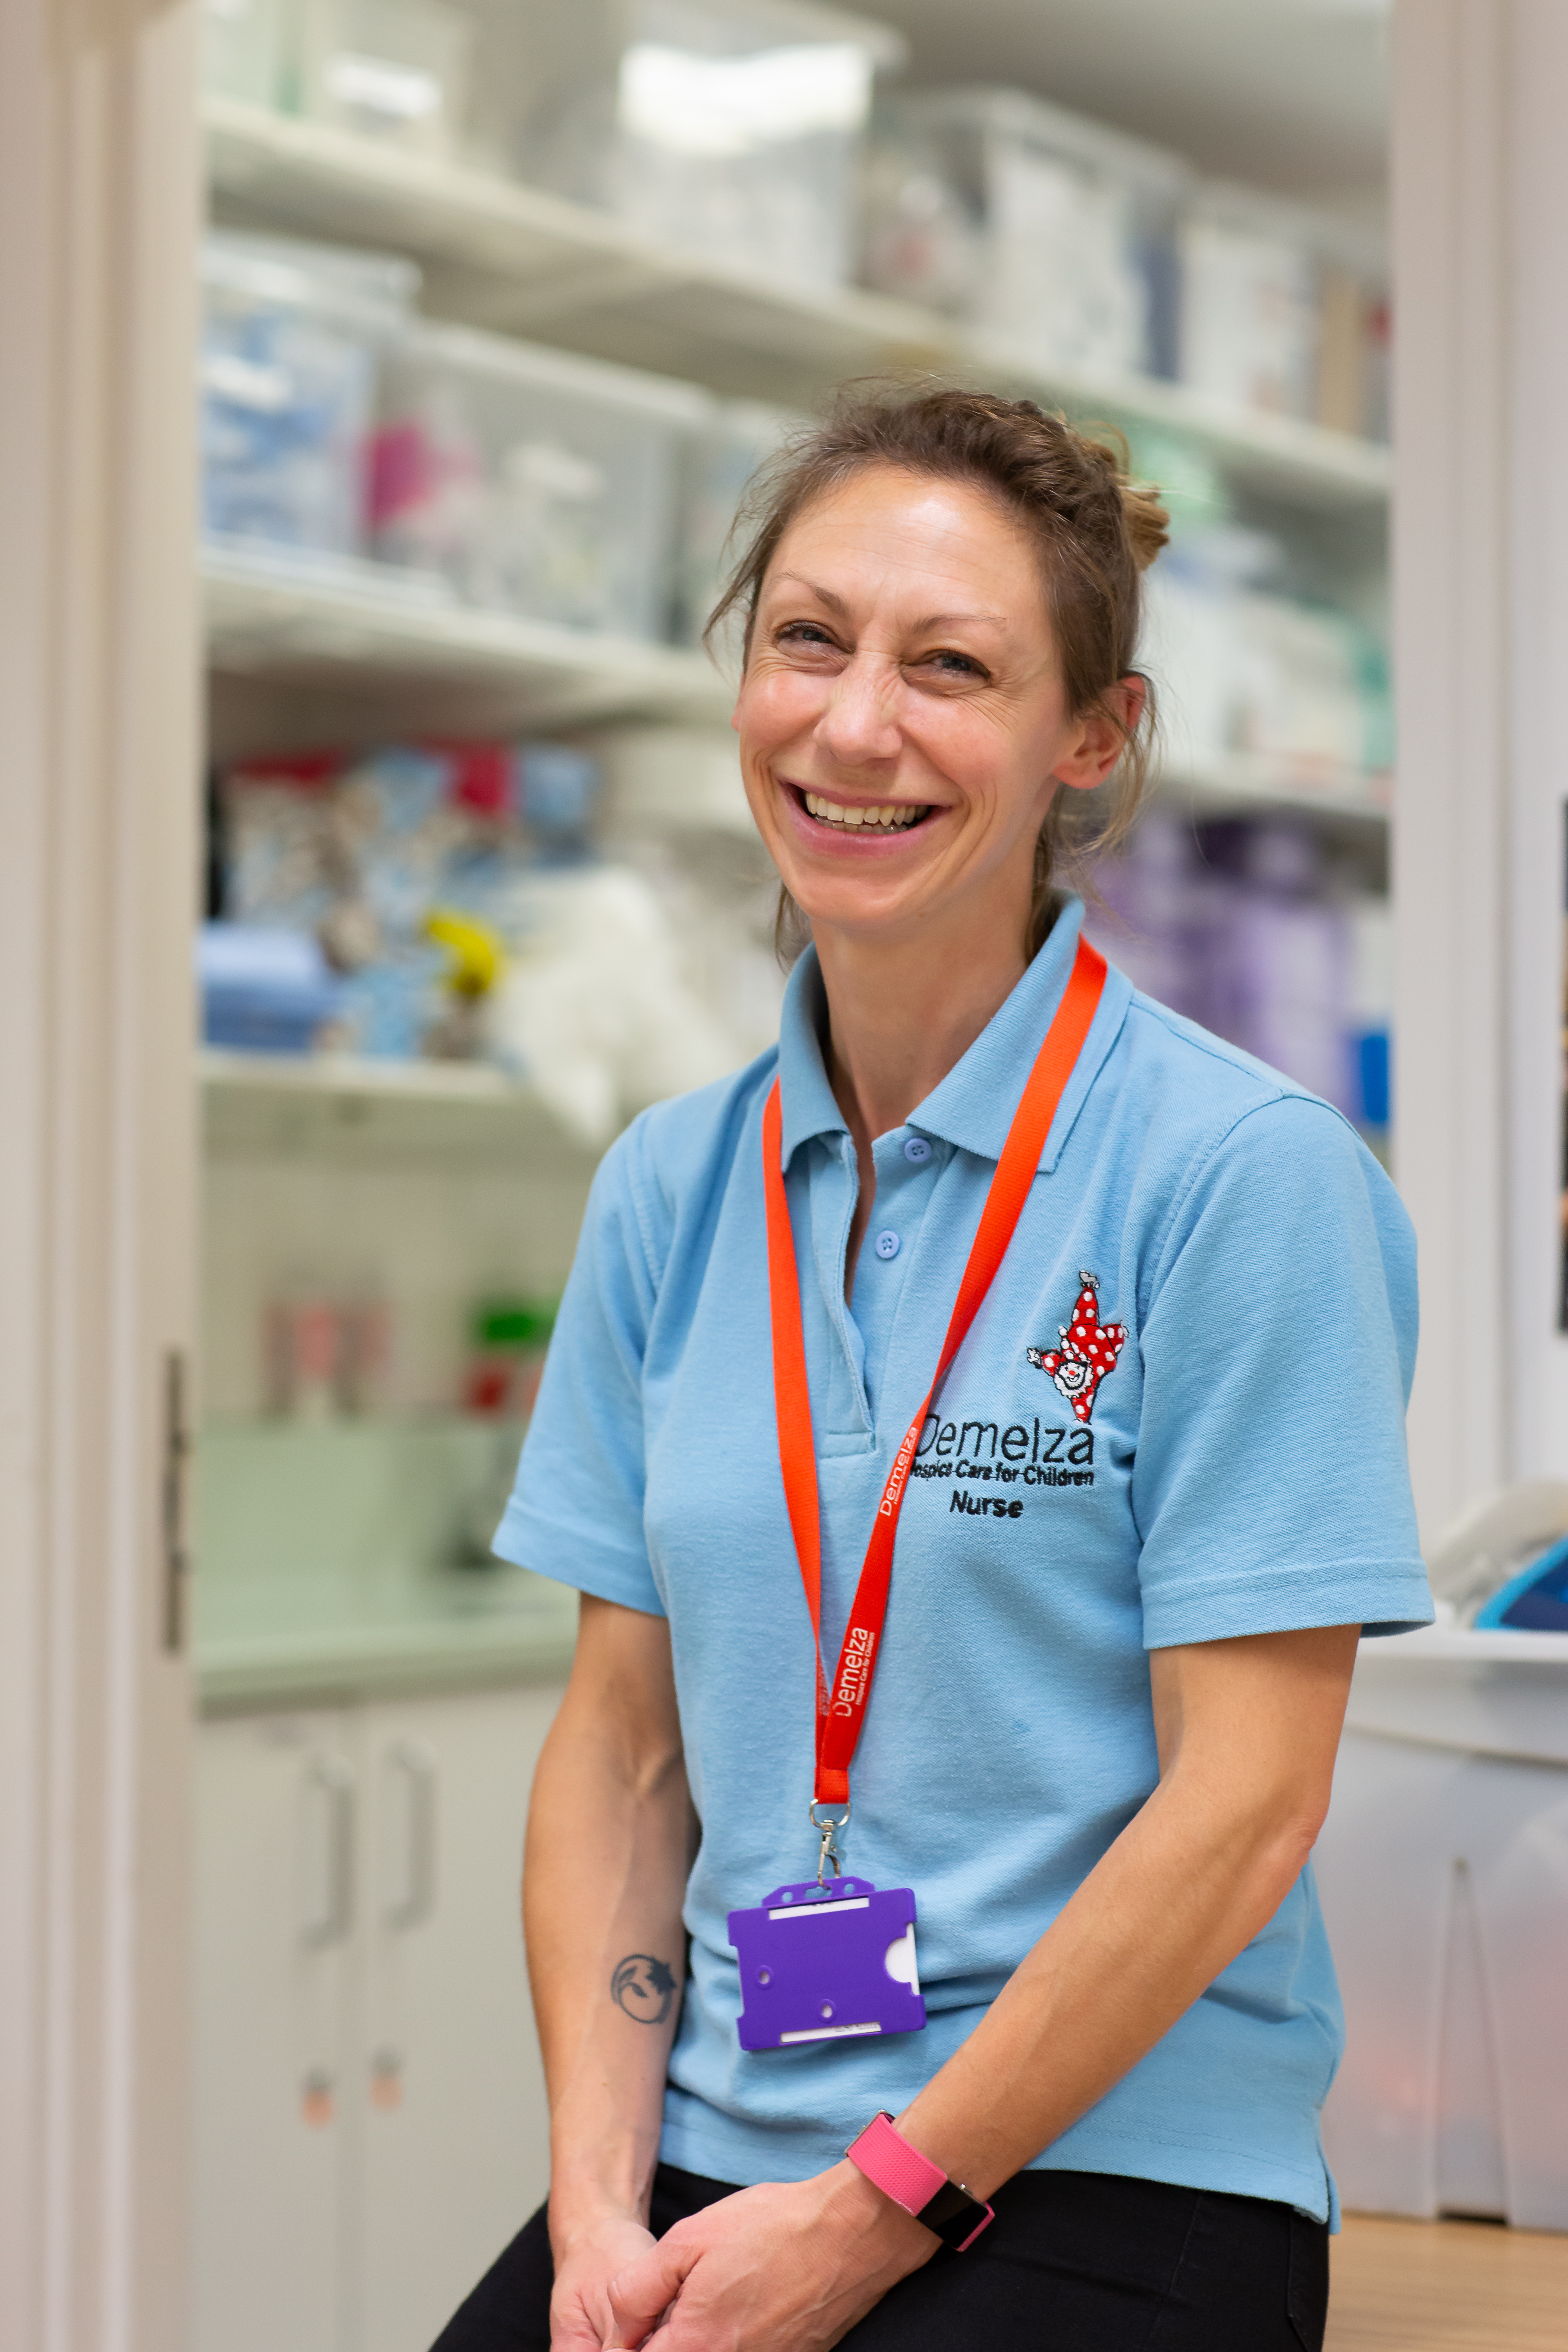 Demelza's Senior Nurse, Melissa, sits perched on a desk, smiling and wearing a light blue polo top.